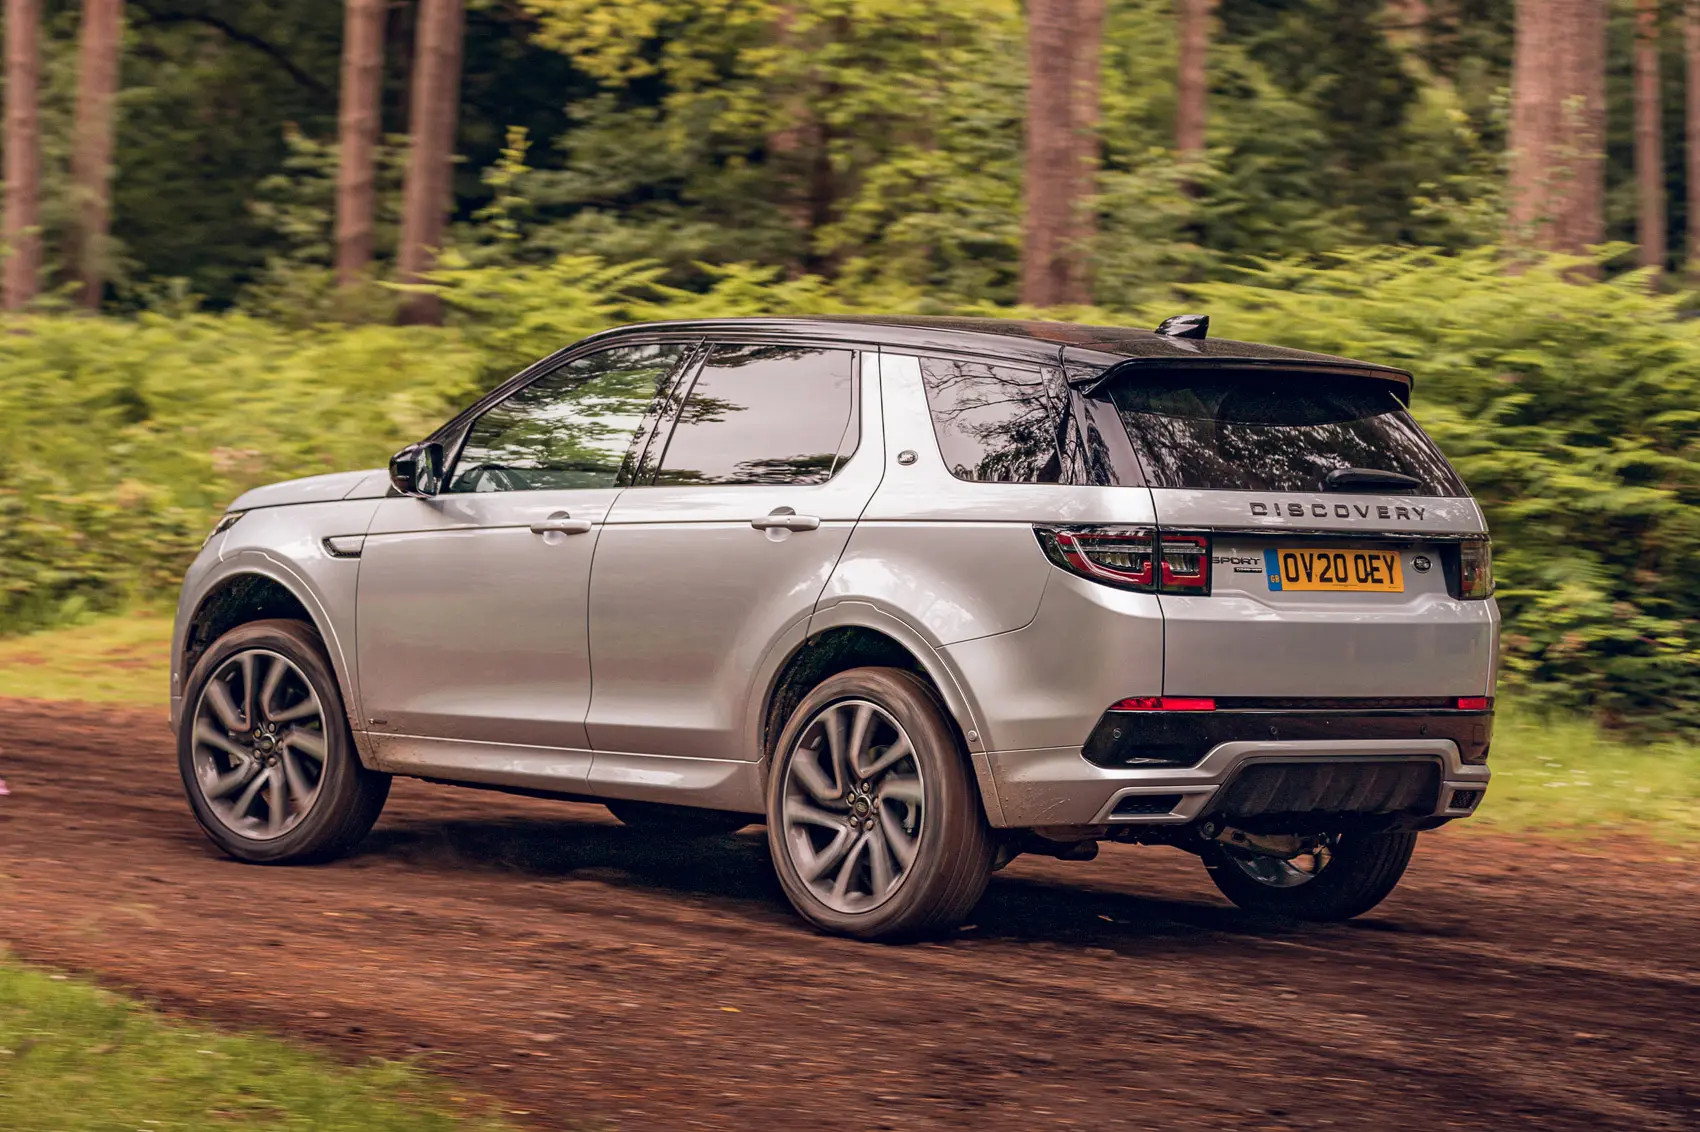 Reliable Land Rover Discovery Engines for Your Adventure